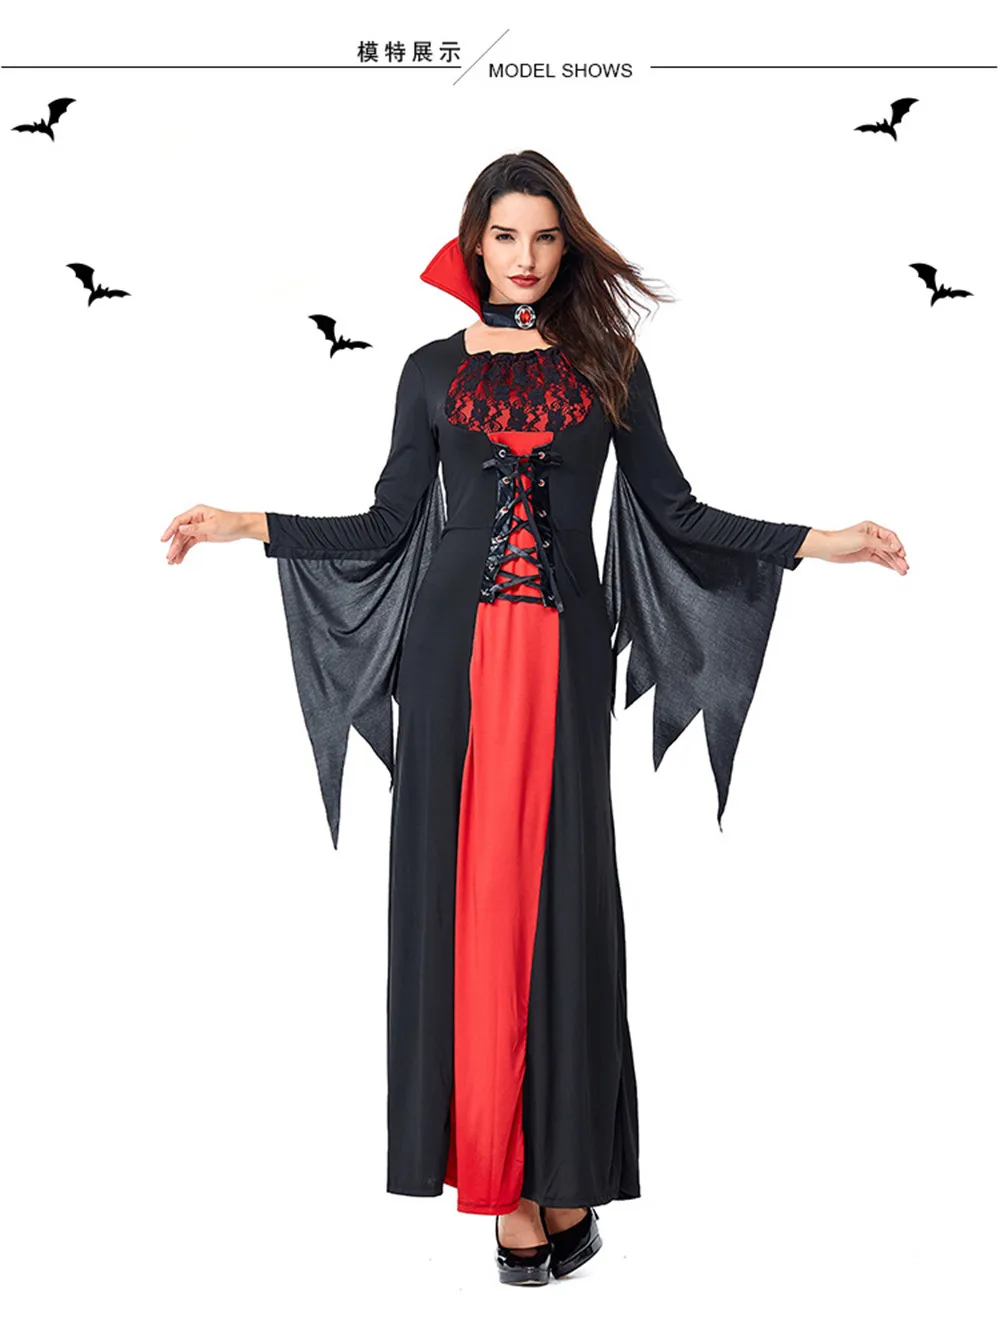 New festival Halloween Costume Sexy Vampire Costume Women Party Cosplay Gothic Halloween Dress Vampire Role Play Witch